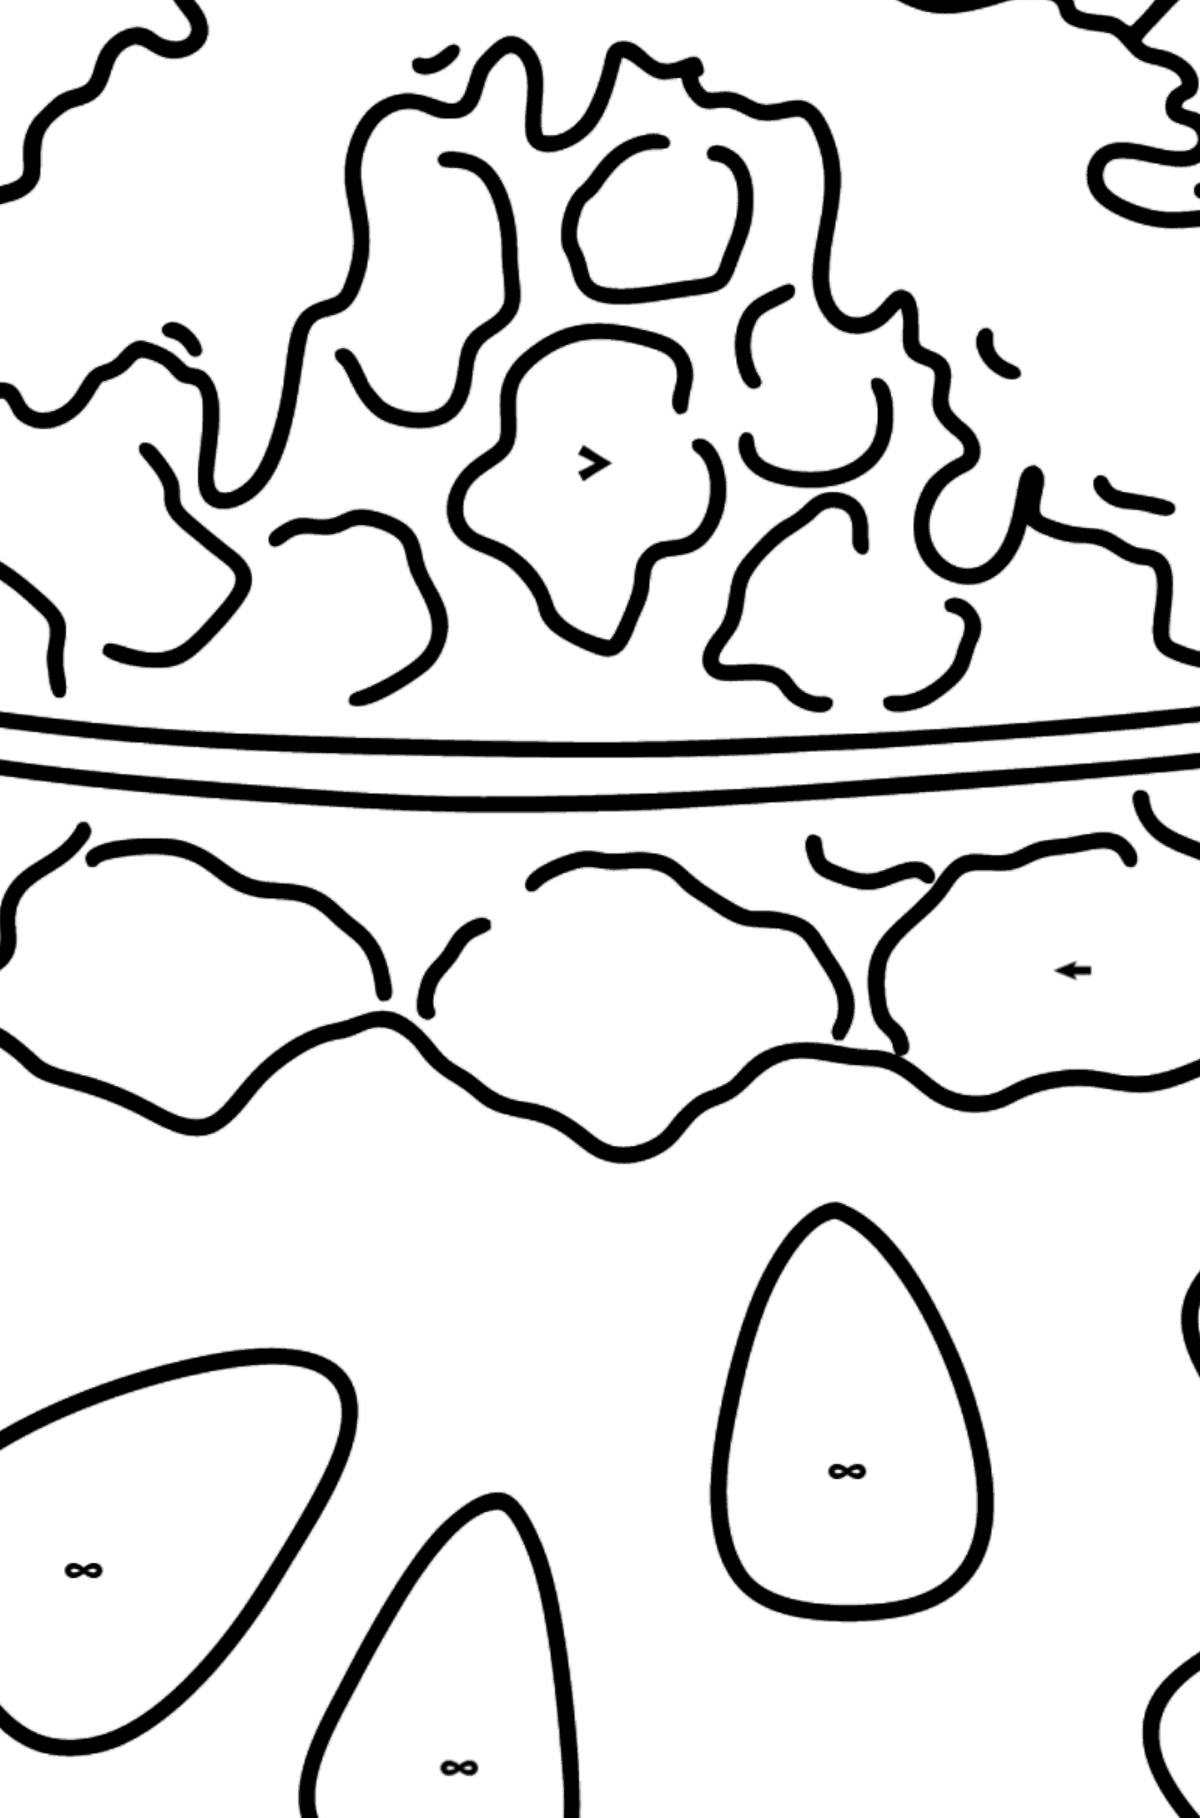 Strawberry Flakes coloring page - Coloring by Symbols for Kids